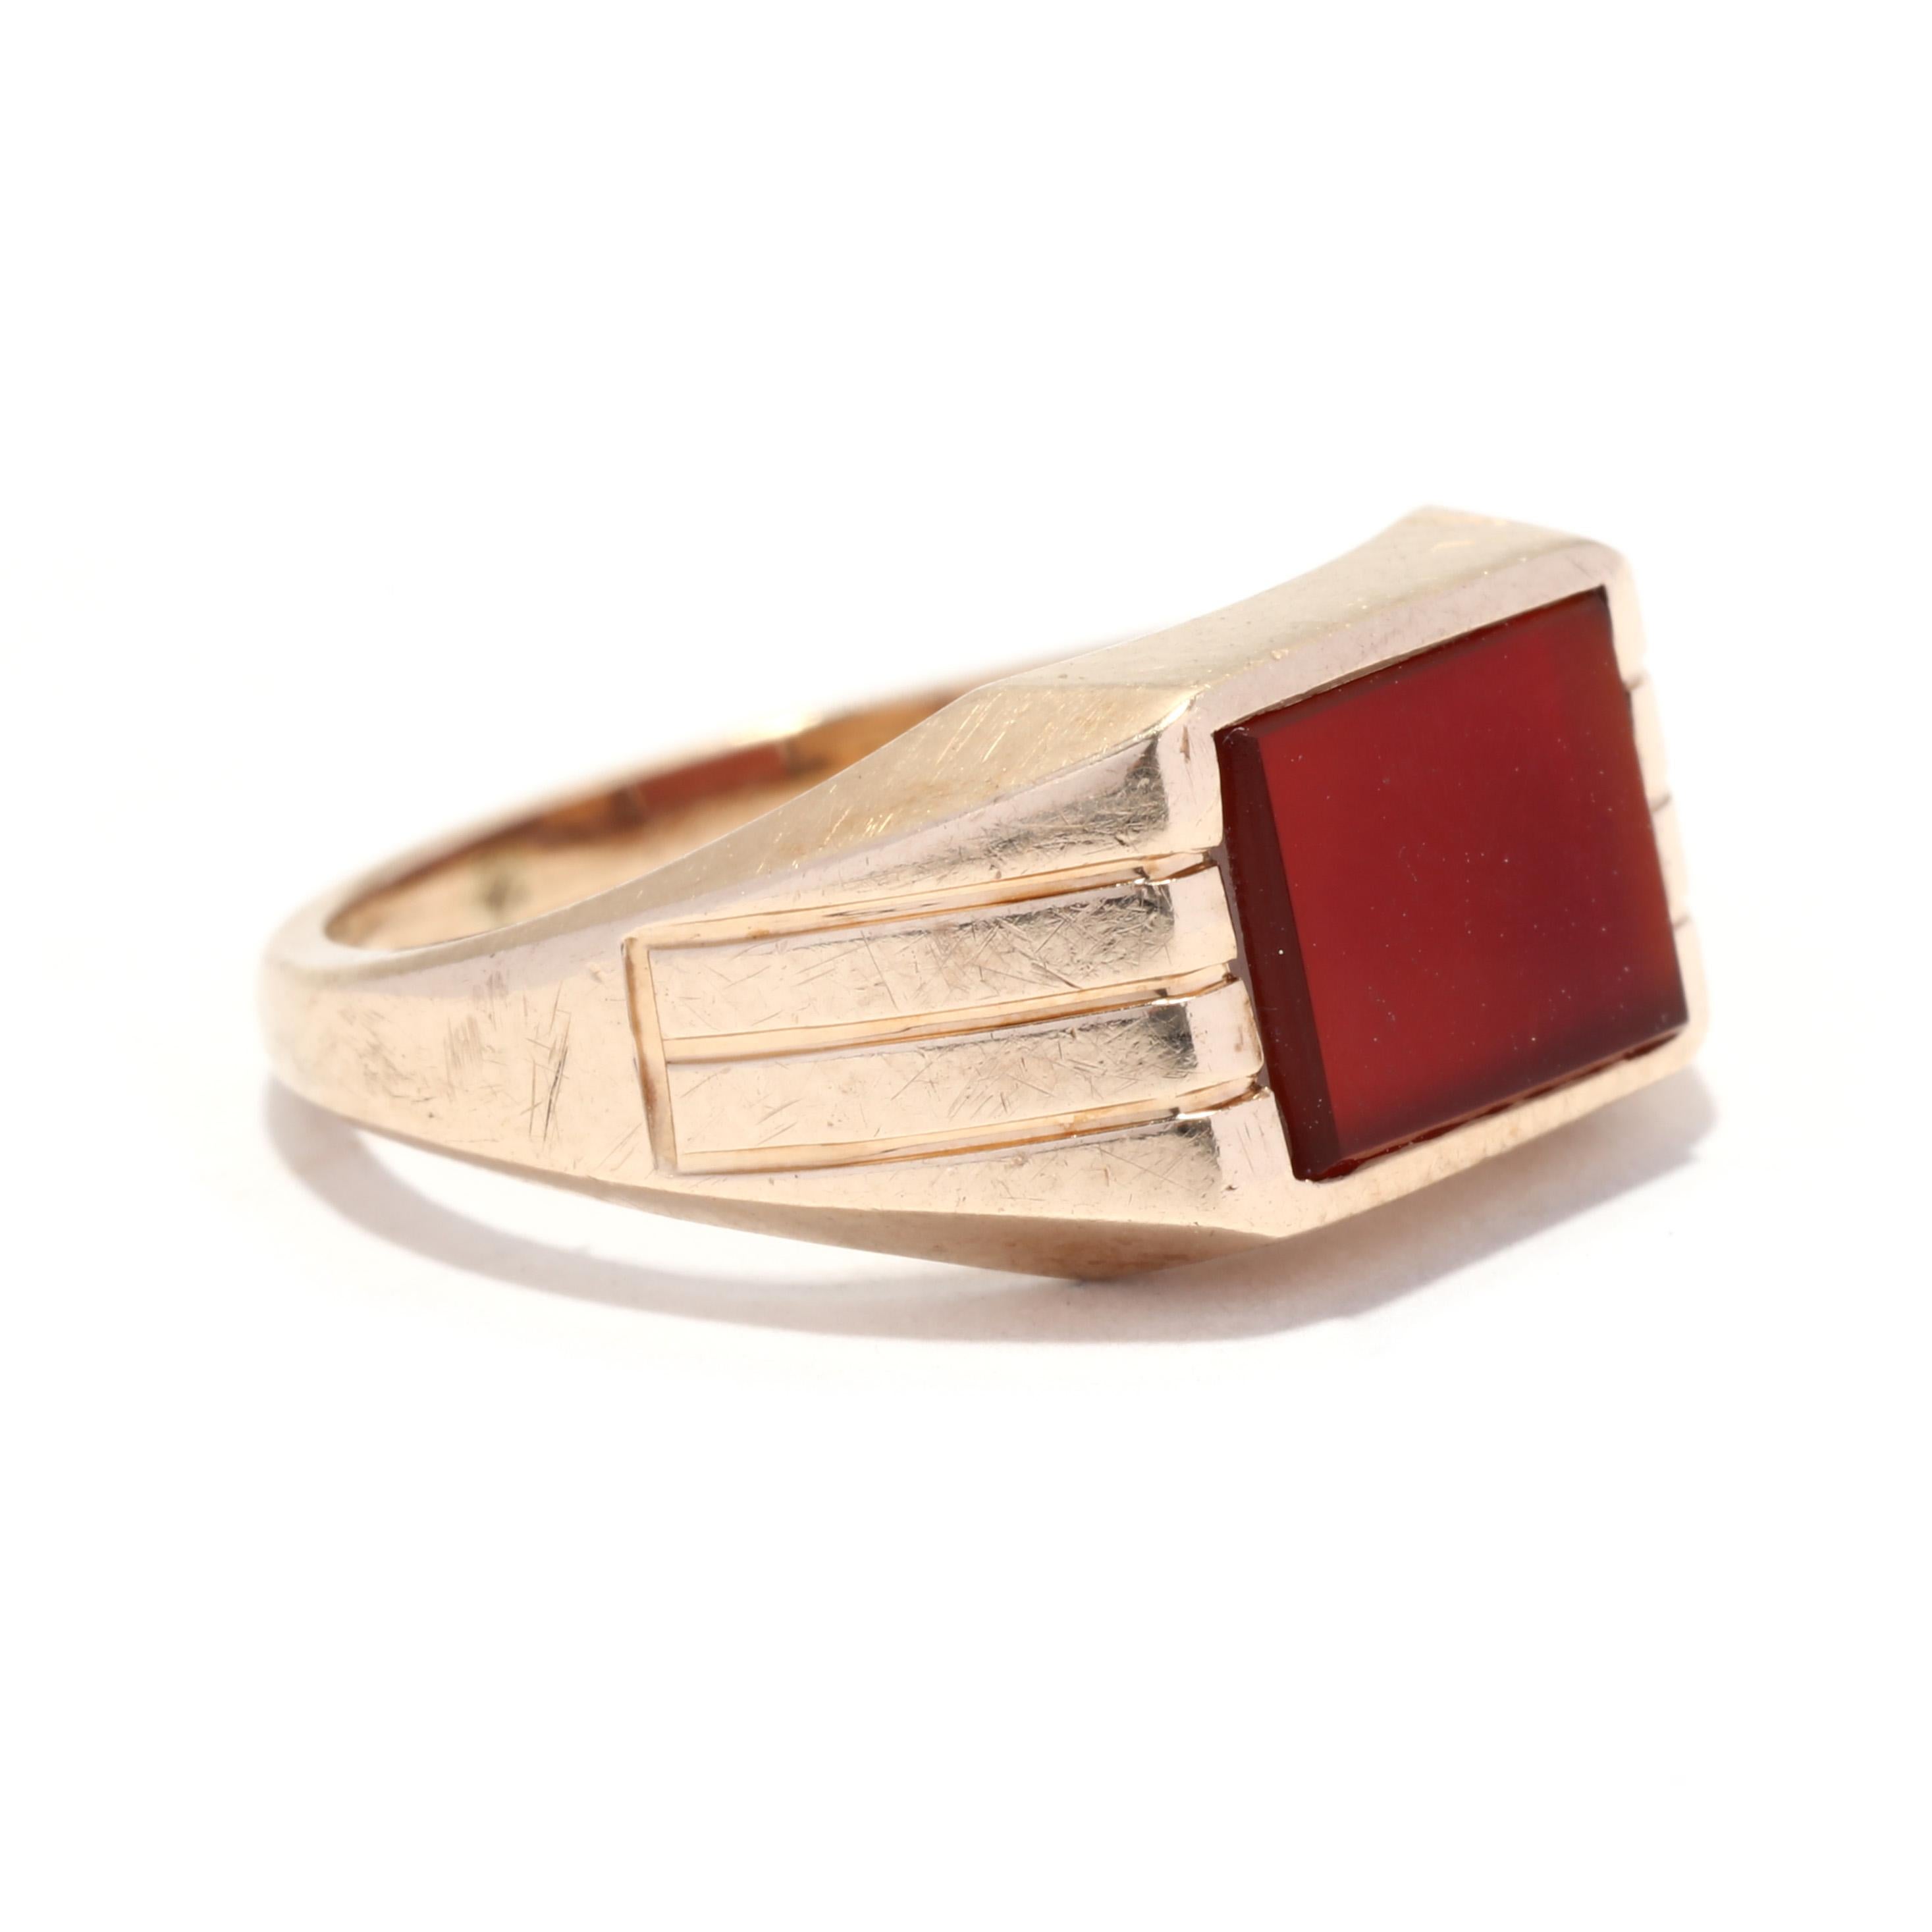 A vintage 10 karat yellow gold carnelian rectangle signet ring. This gent's pinky ring features a rectangular tablet carnelian set in a tapered signet ring with ridged detailing on the band.

Stones:
- carnelian, 1 
- rectangular tablet
- 8 x 6